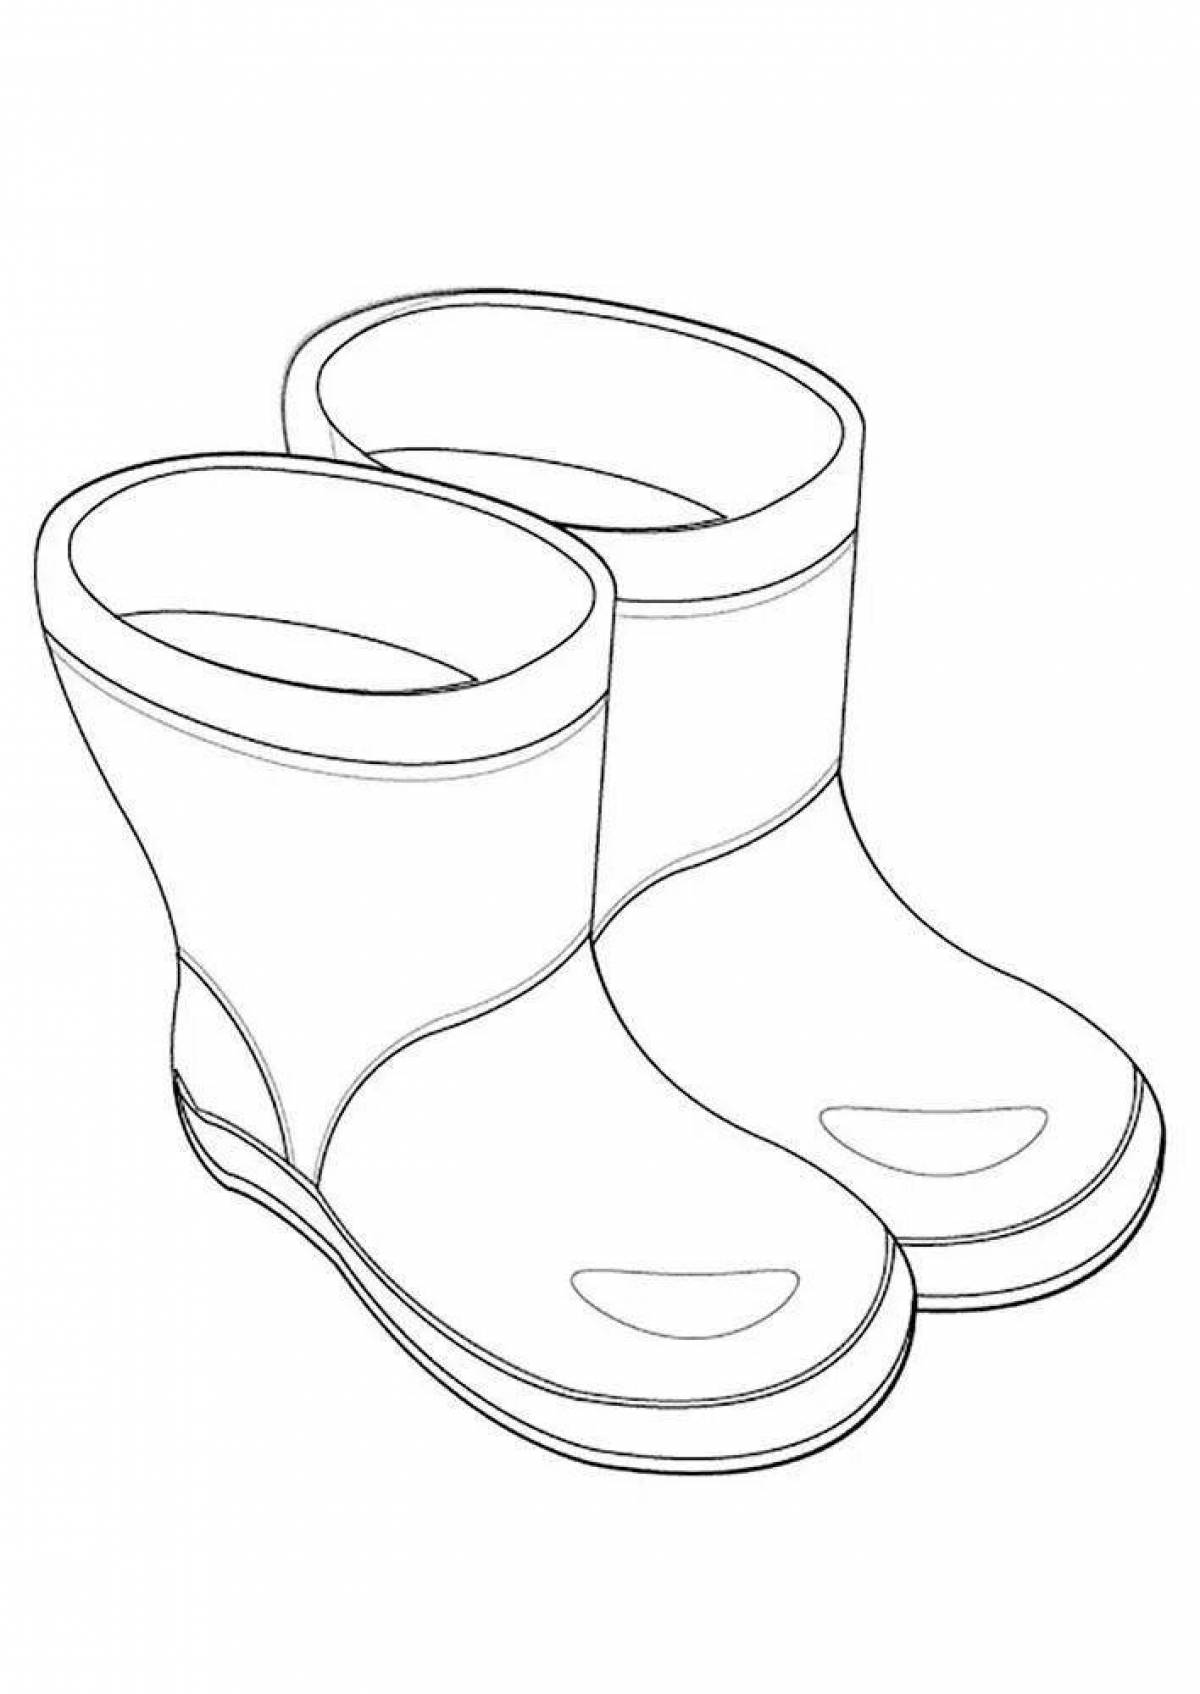 Cool boots coloring book for kids